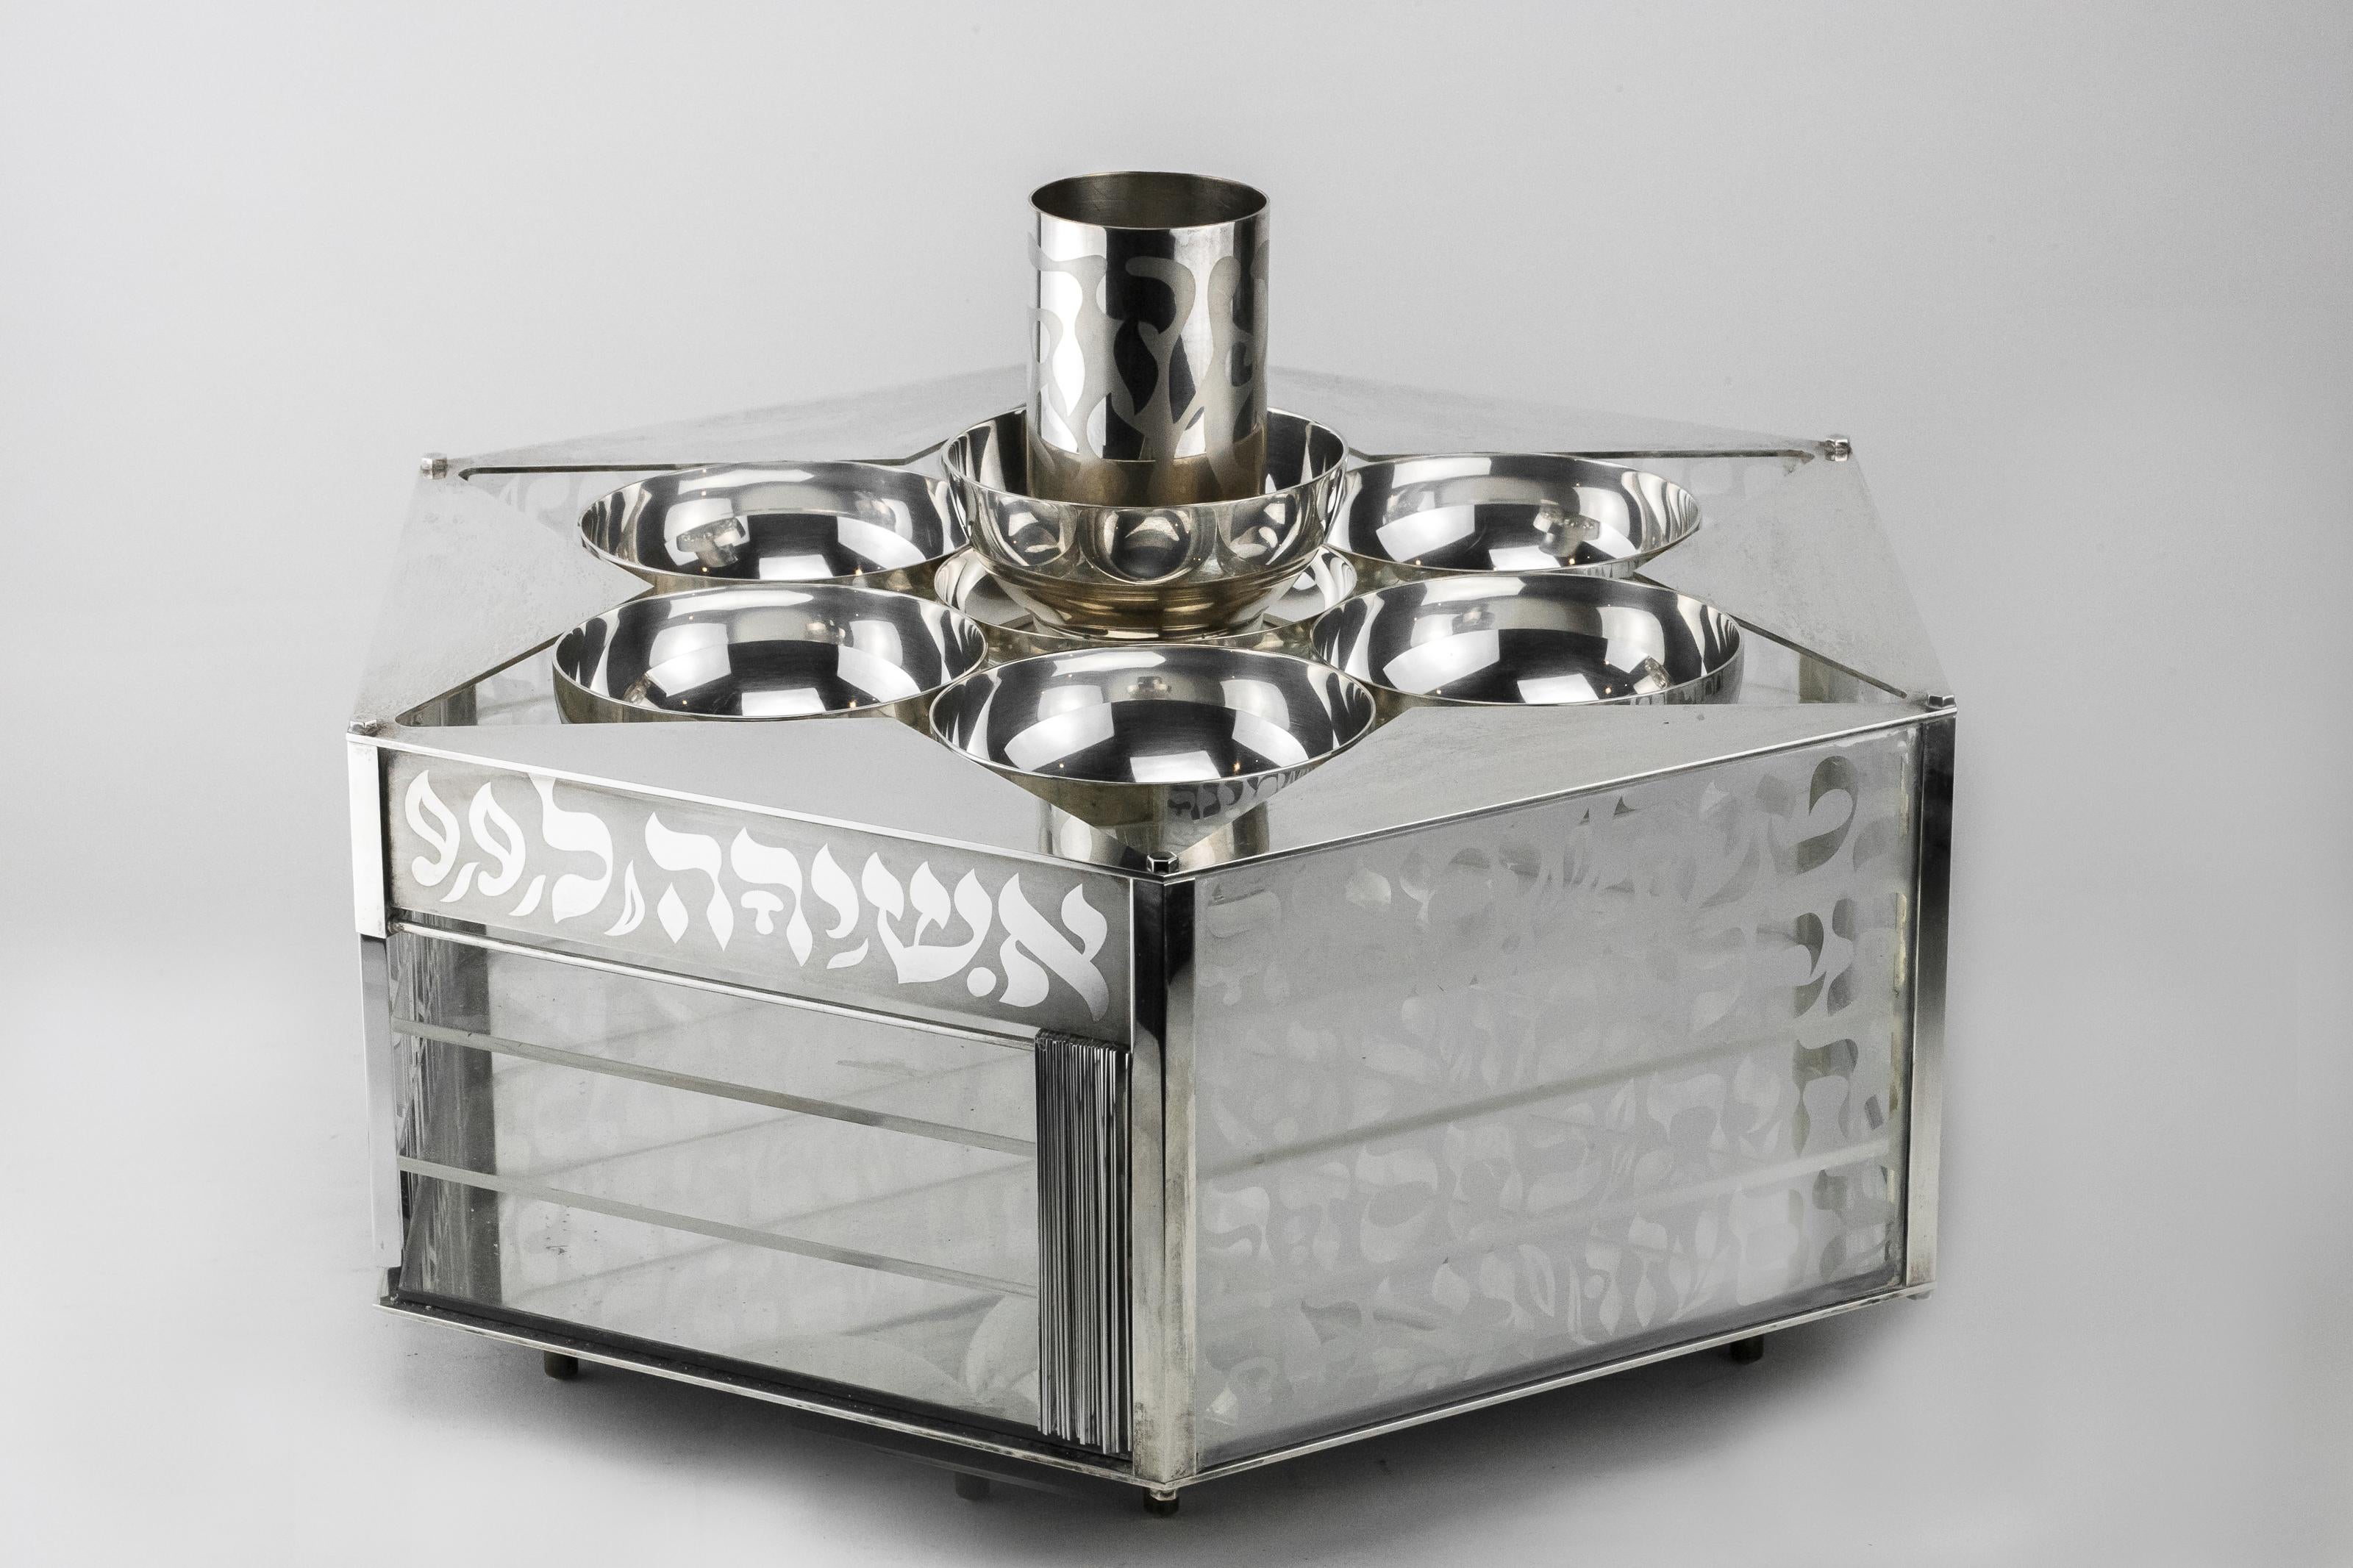 Heavy and Massive Modern silver and glass three-tier Passover set by Menachem Berman.
The top part, in a shape of a star of David, holds six silver dishes and a wine cup, six side panels are decorated with Hebrew text of the 